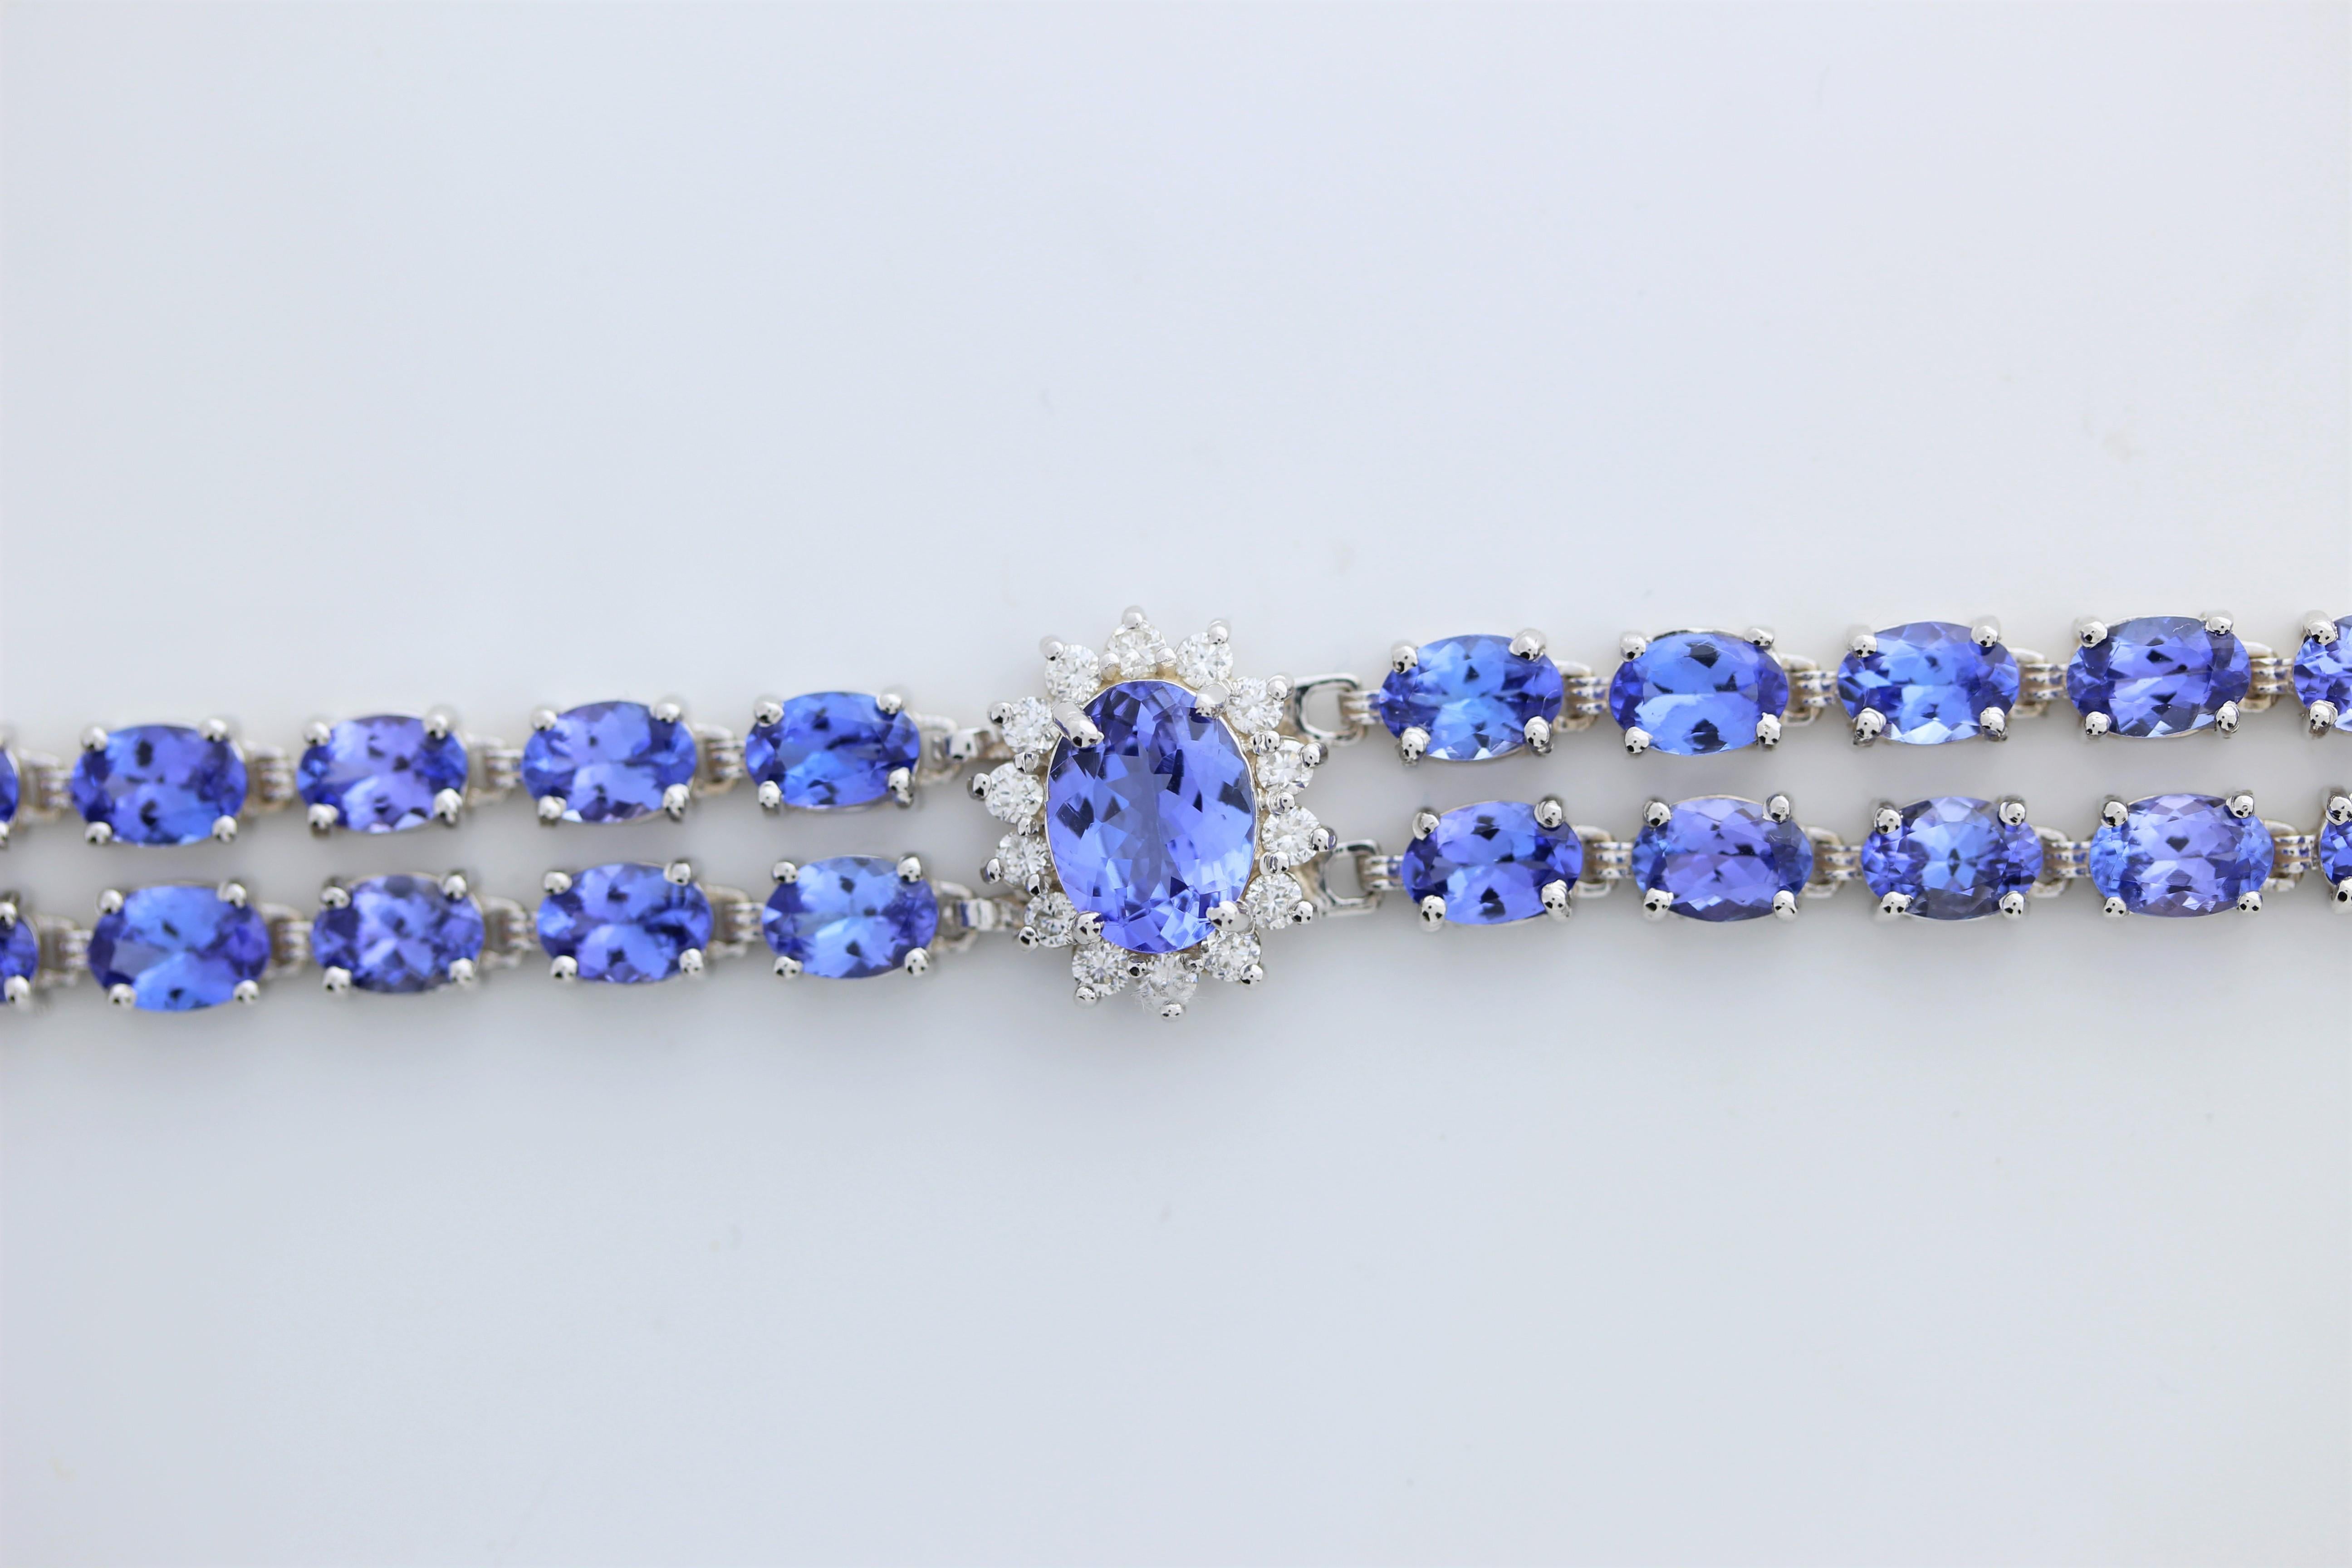 The fashion bracelet features tanzanite gemstones with a total weight of 24 carats, set in 18 karat white gold. The bracelet is accented by a total of 42 round-cut diamonds with a combined weight of 1.5 carats. The combination of tanzanite's unique